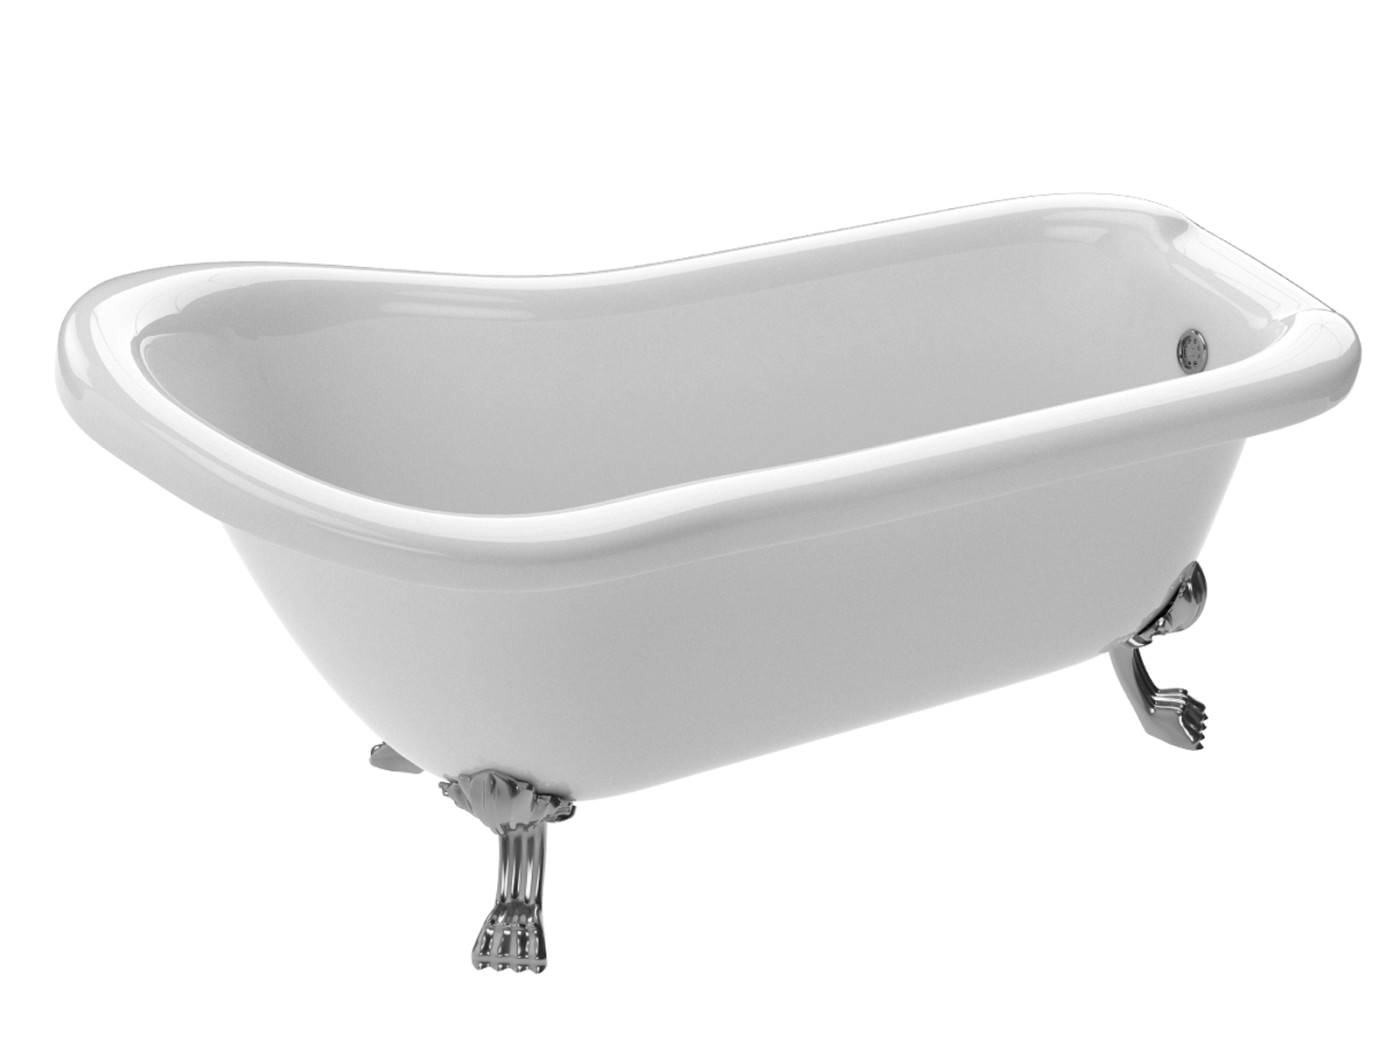 pegasus 5 ft claw foot one piece acrylic freestanding soaking bathtub in glossy white